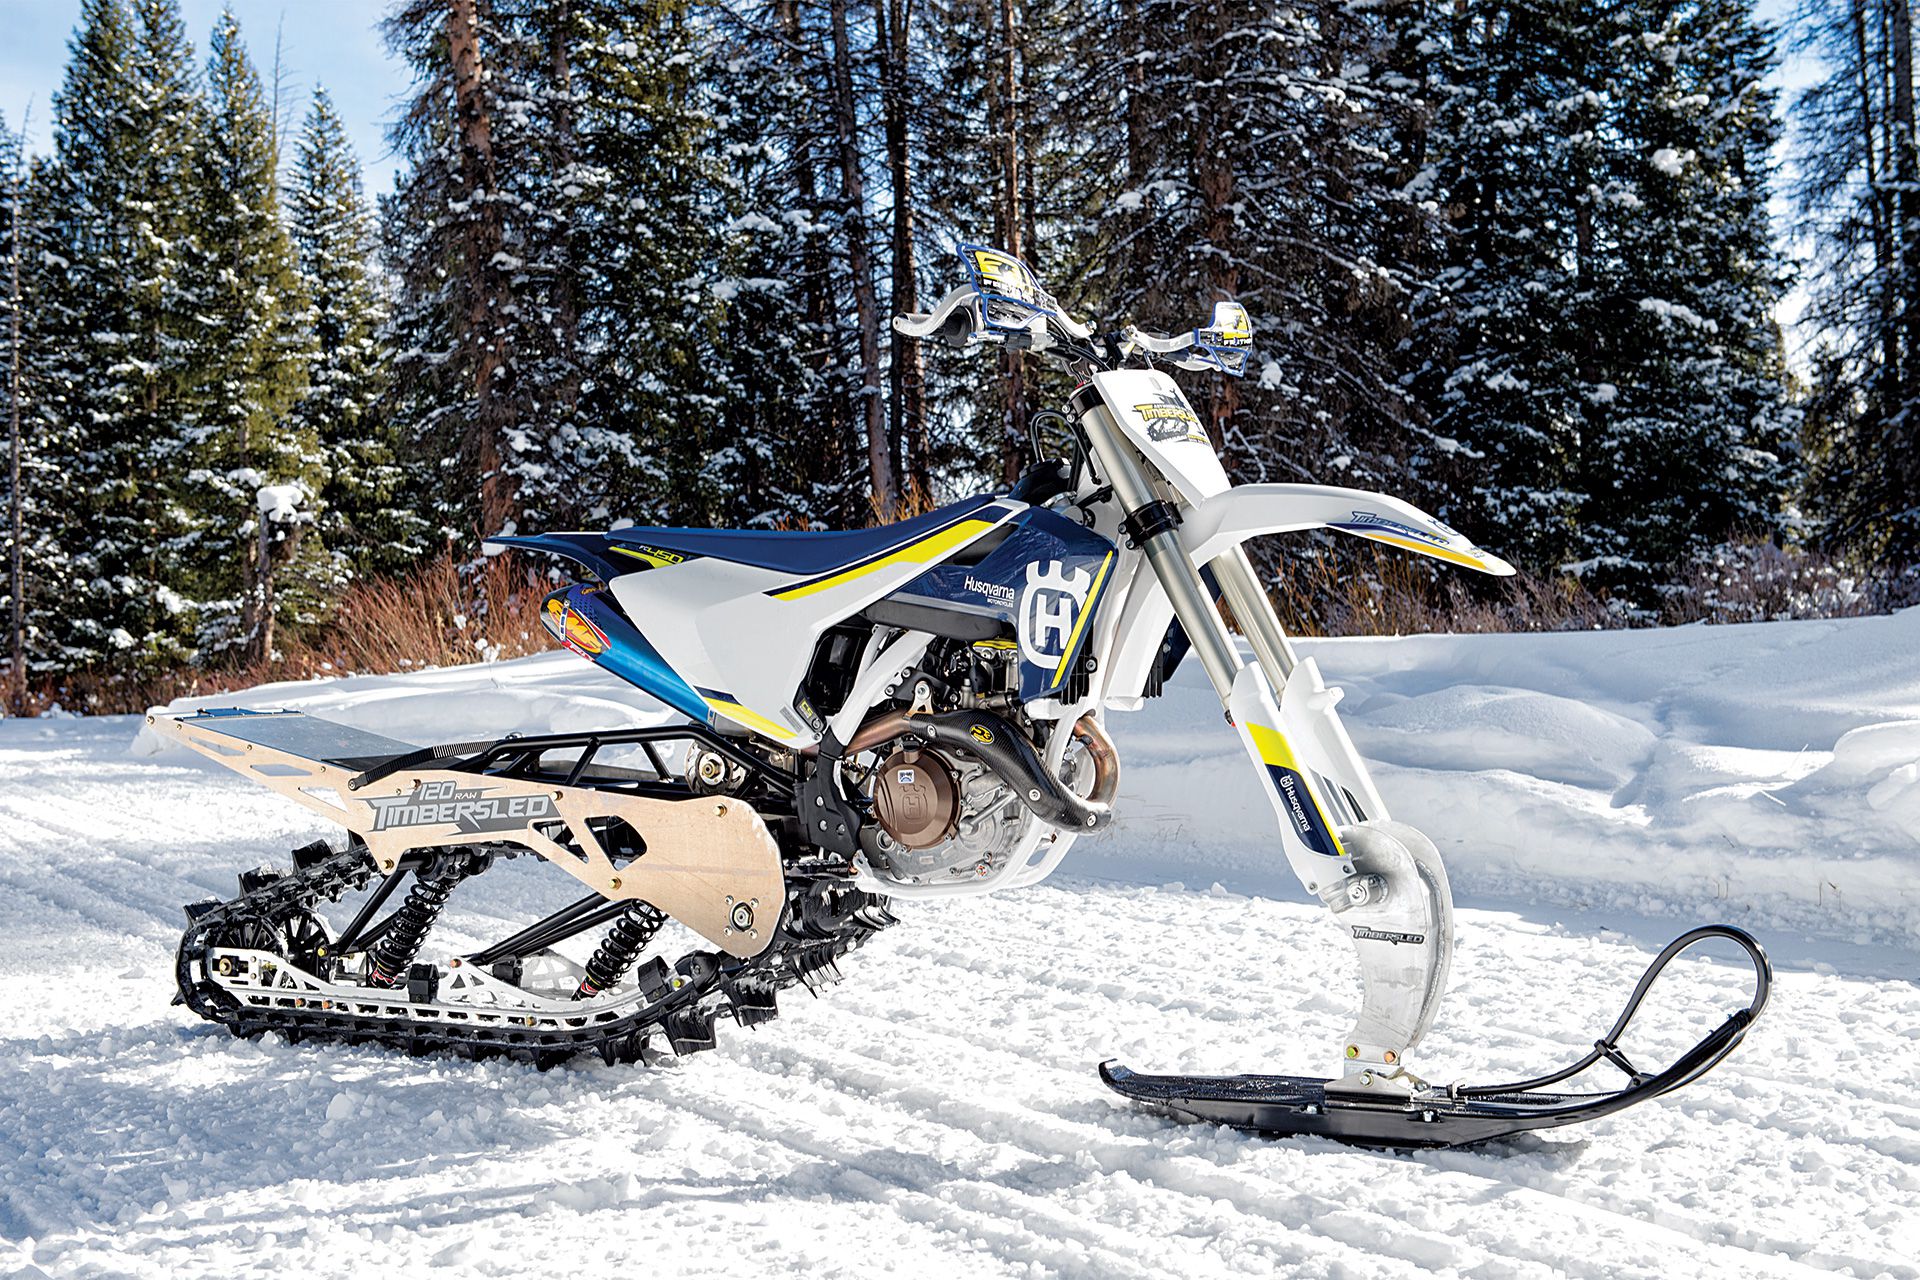 2017 Timbersled Snow Bike FIRST RIDE Review